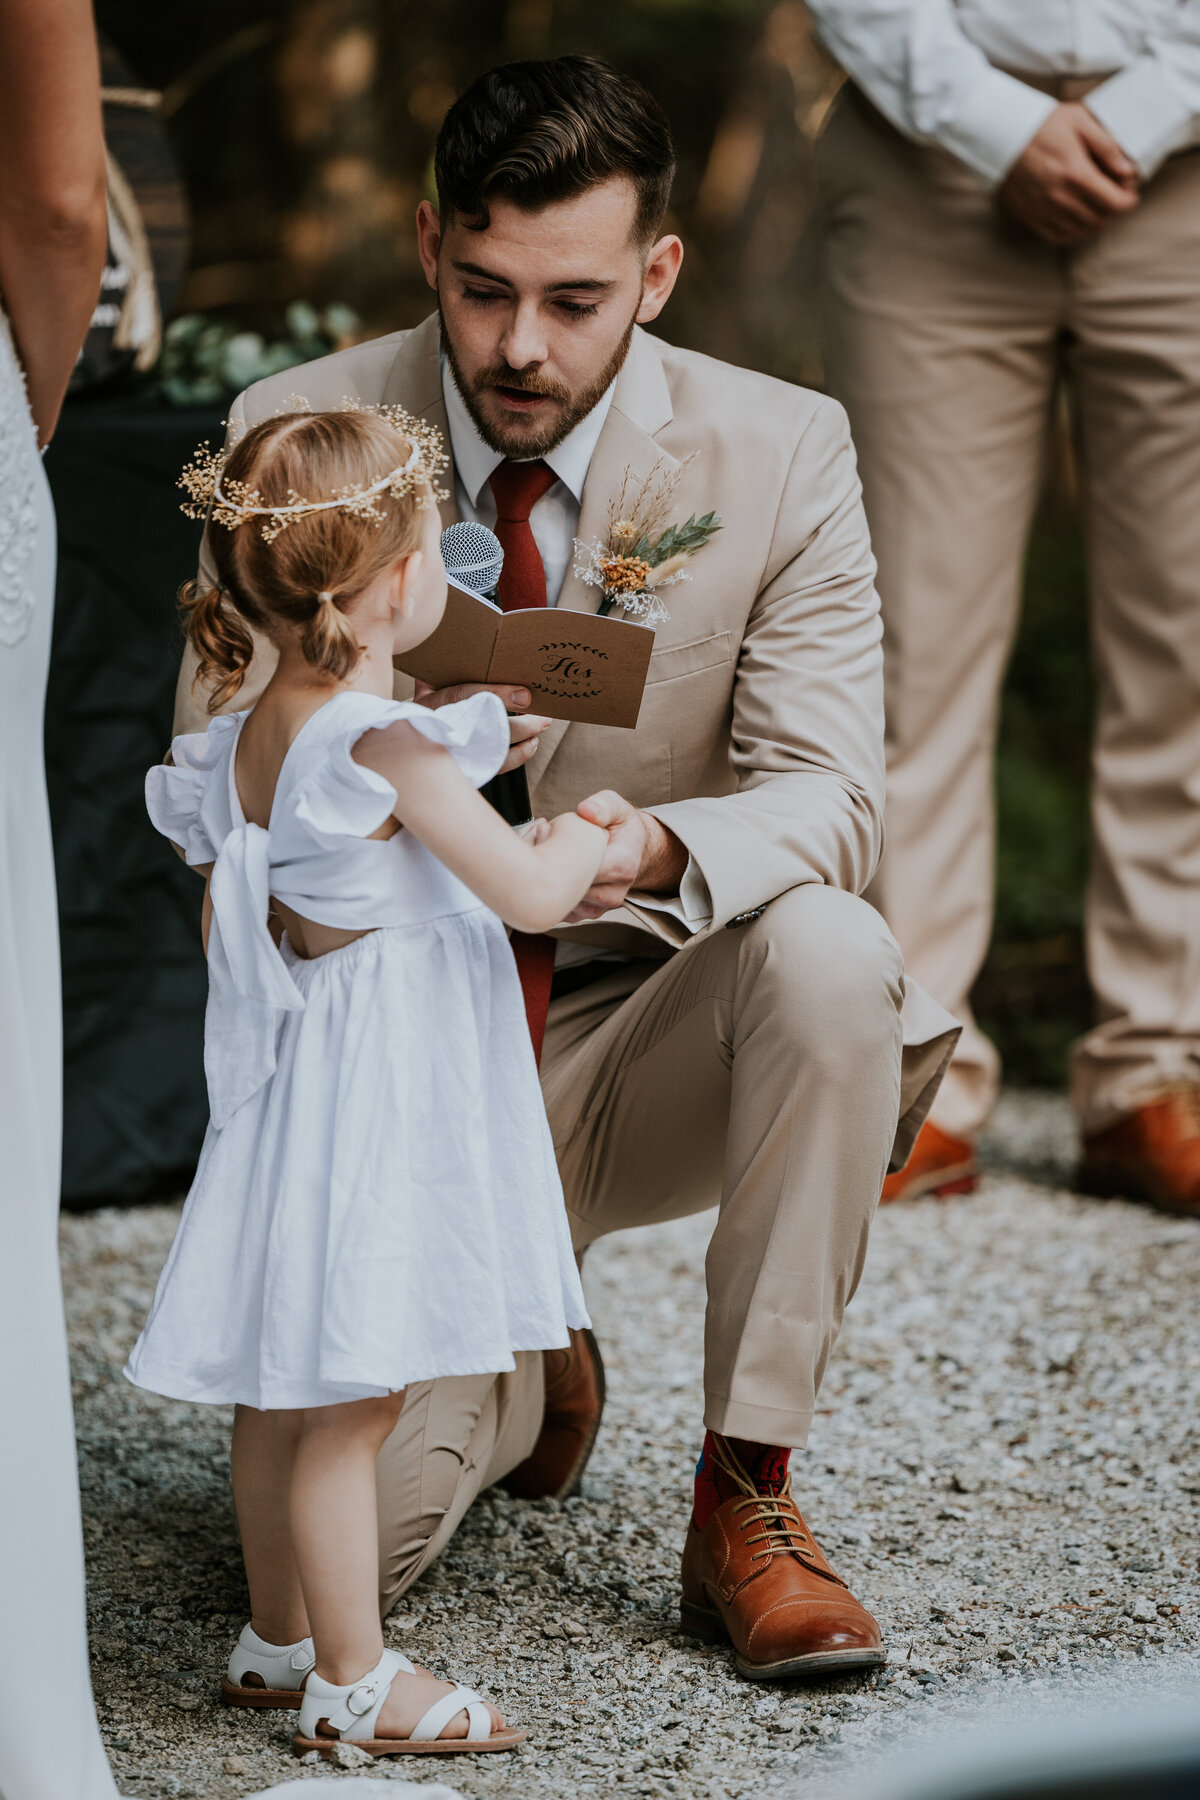 Groom leans on one knee while reading vows to brides daughter.